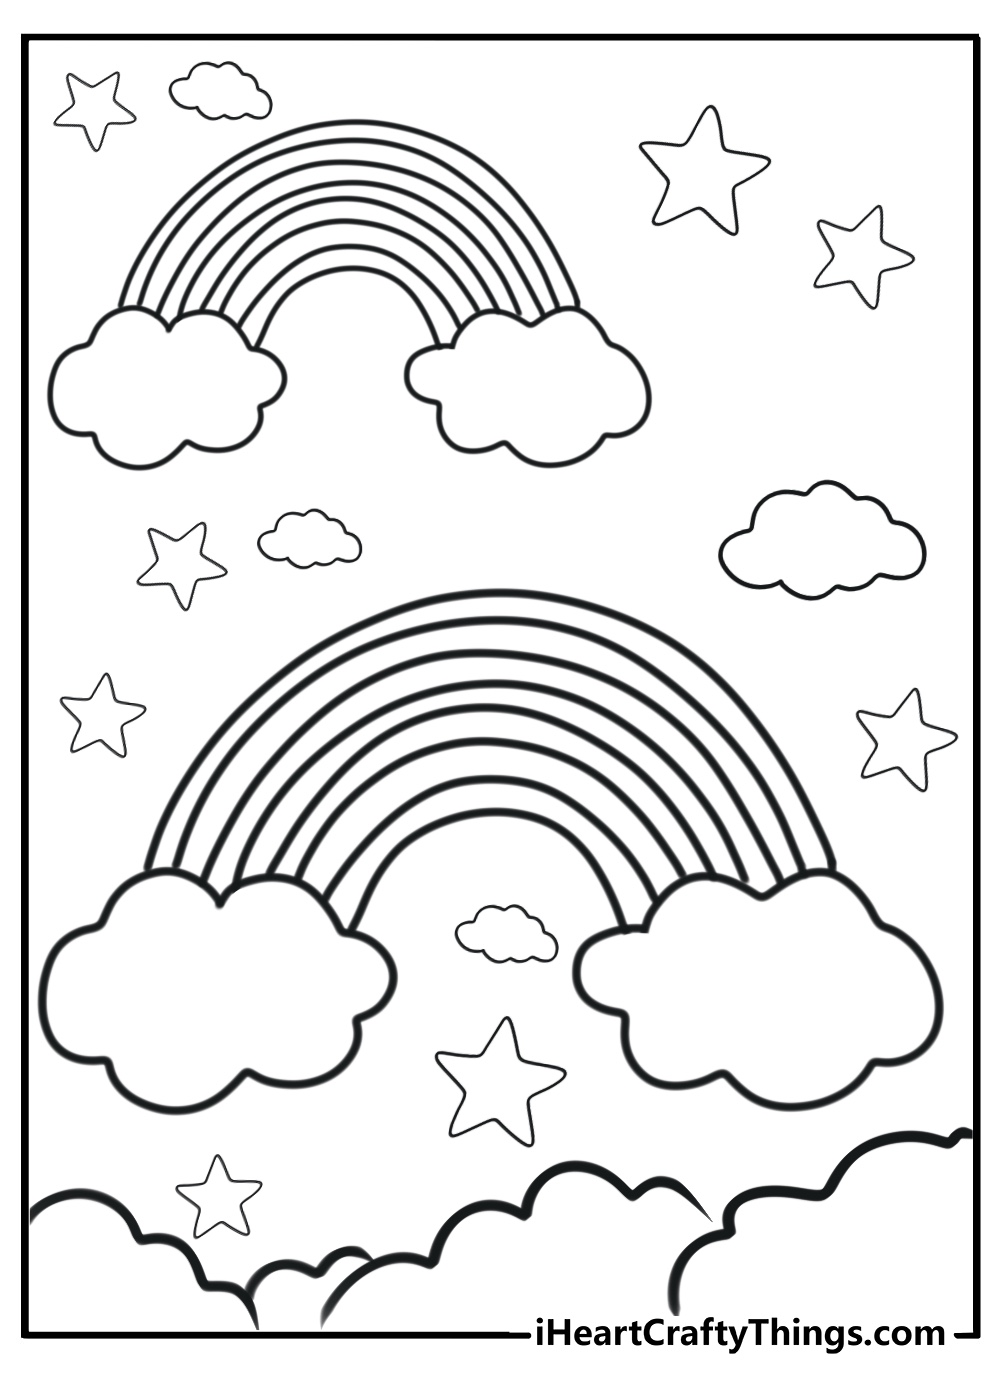 Coloring page of a rainbow with clouds and stars